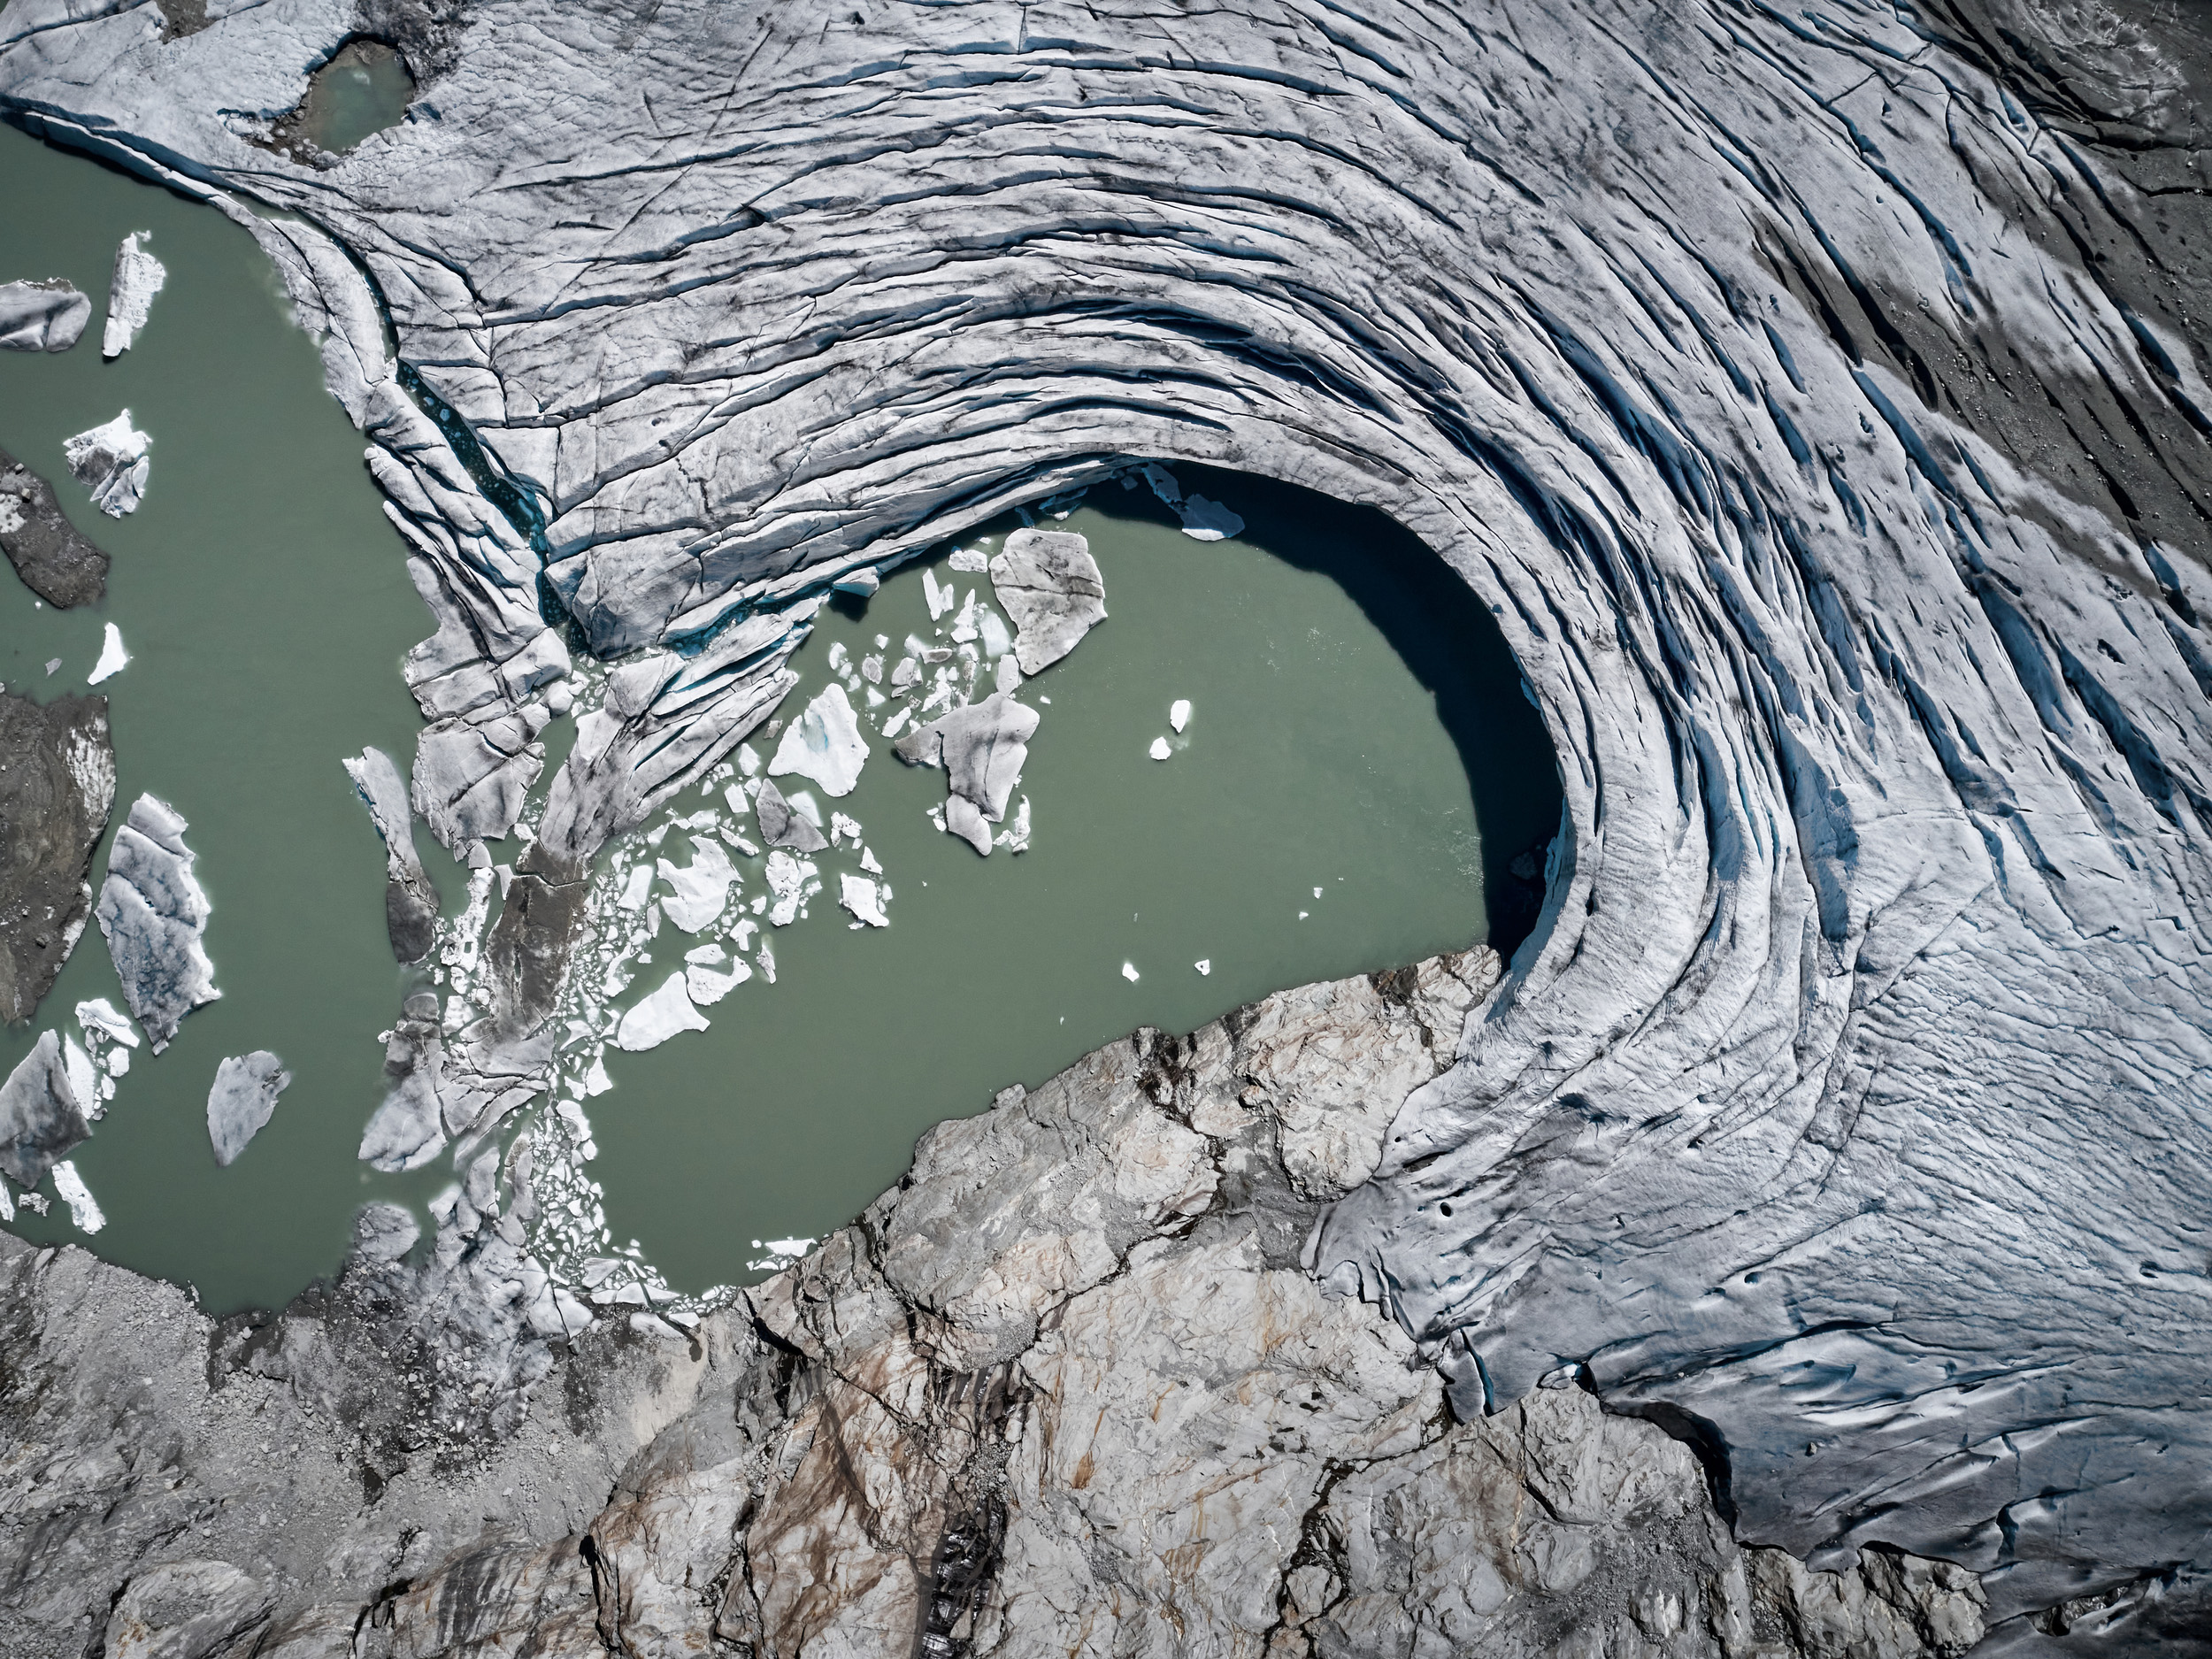 From above, the same wrinkled glacier but the hole has turned into a lake, with sections of glacial ice breaking into the water.